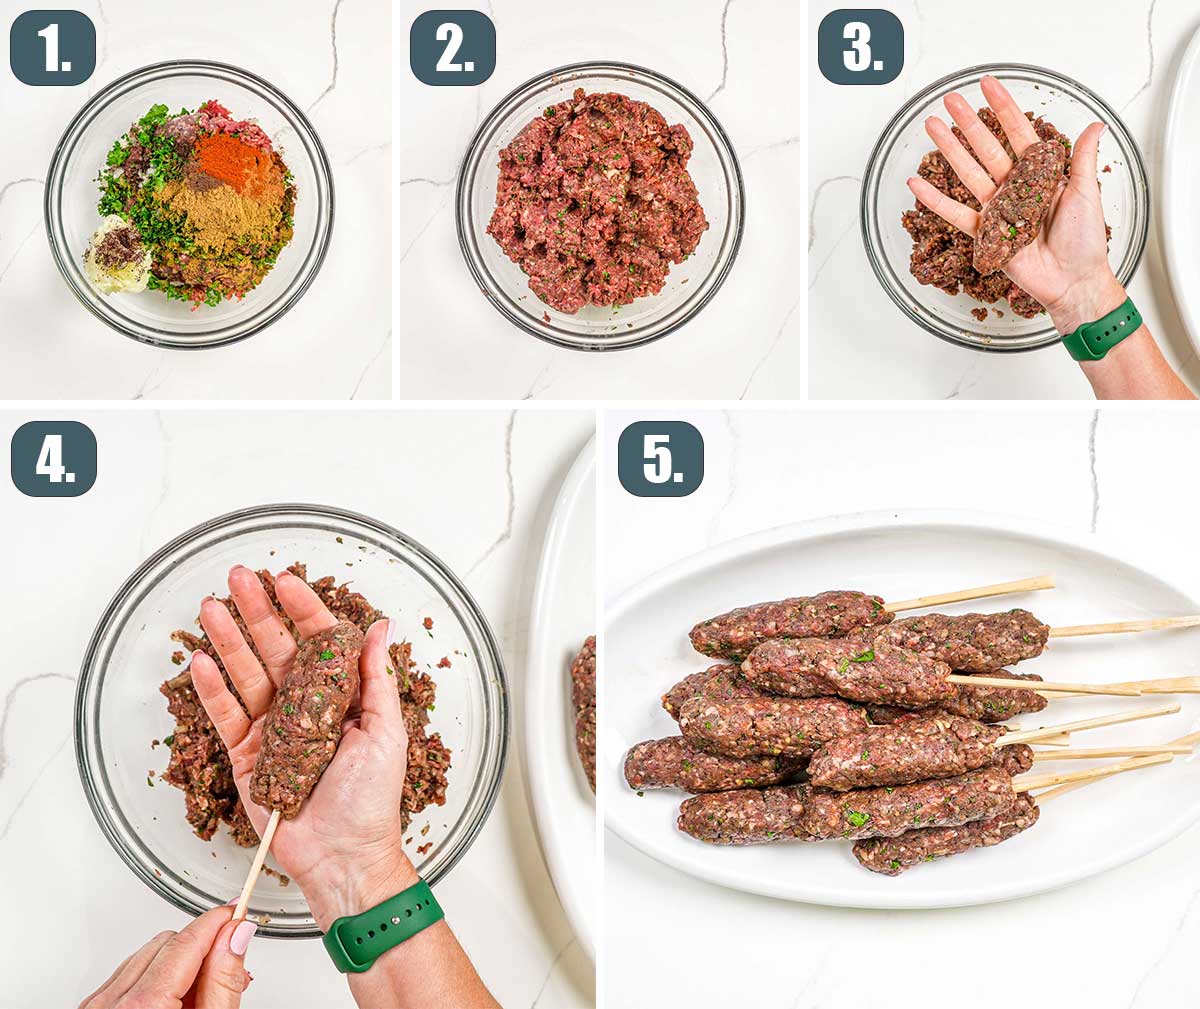 process shots showing how to prepare meat mixture for koftas and how to shape them.